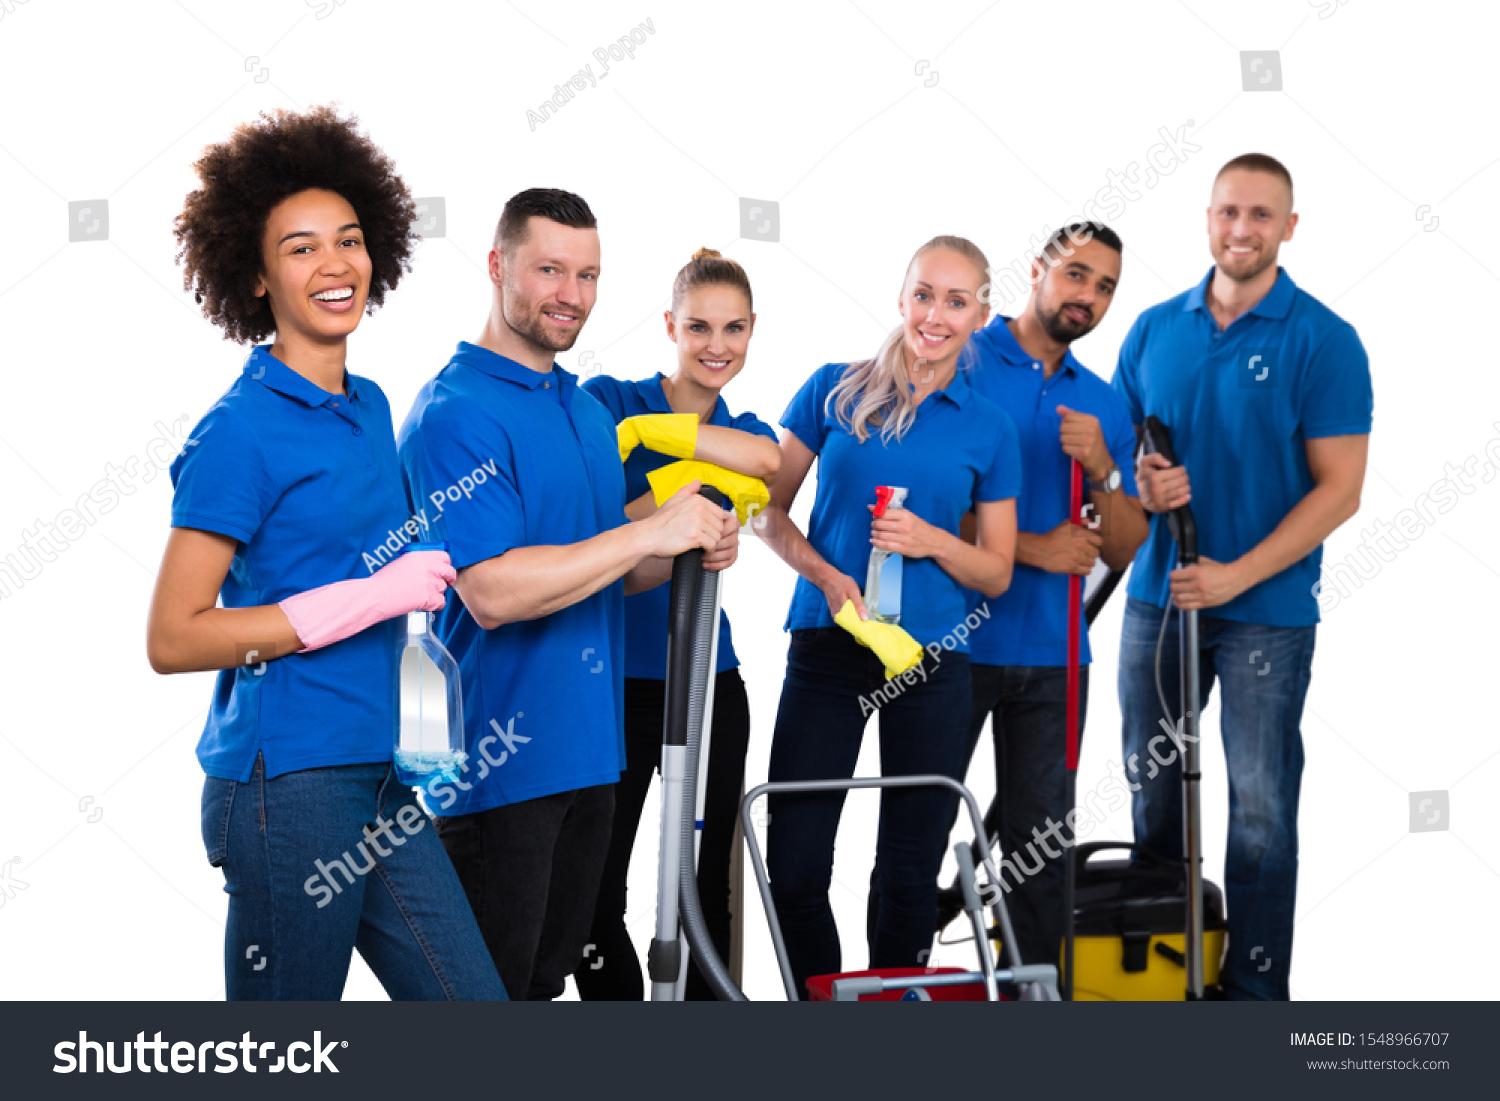 Smiling Multiethnic Group Of Janitors Wearing Blue T-shirt Standing Grouped Together With Their Equipment #1548966707